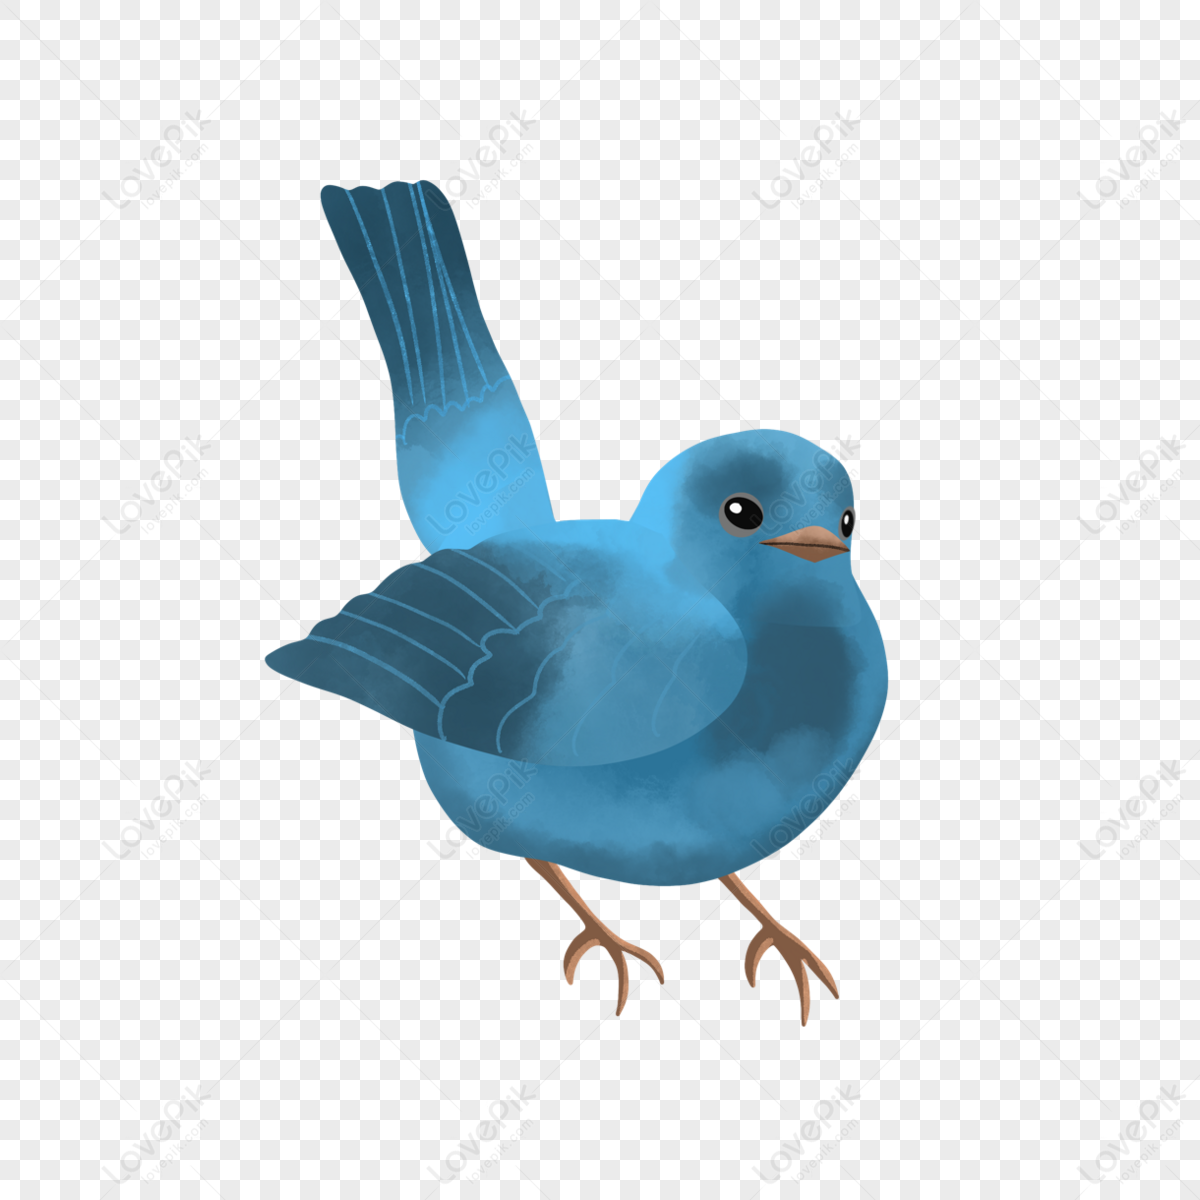 Blue watercolor bird animal,blue animals,wing,anime png hd transparent image